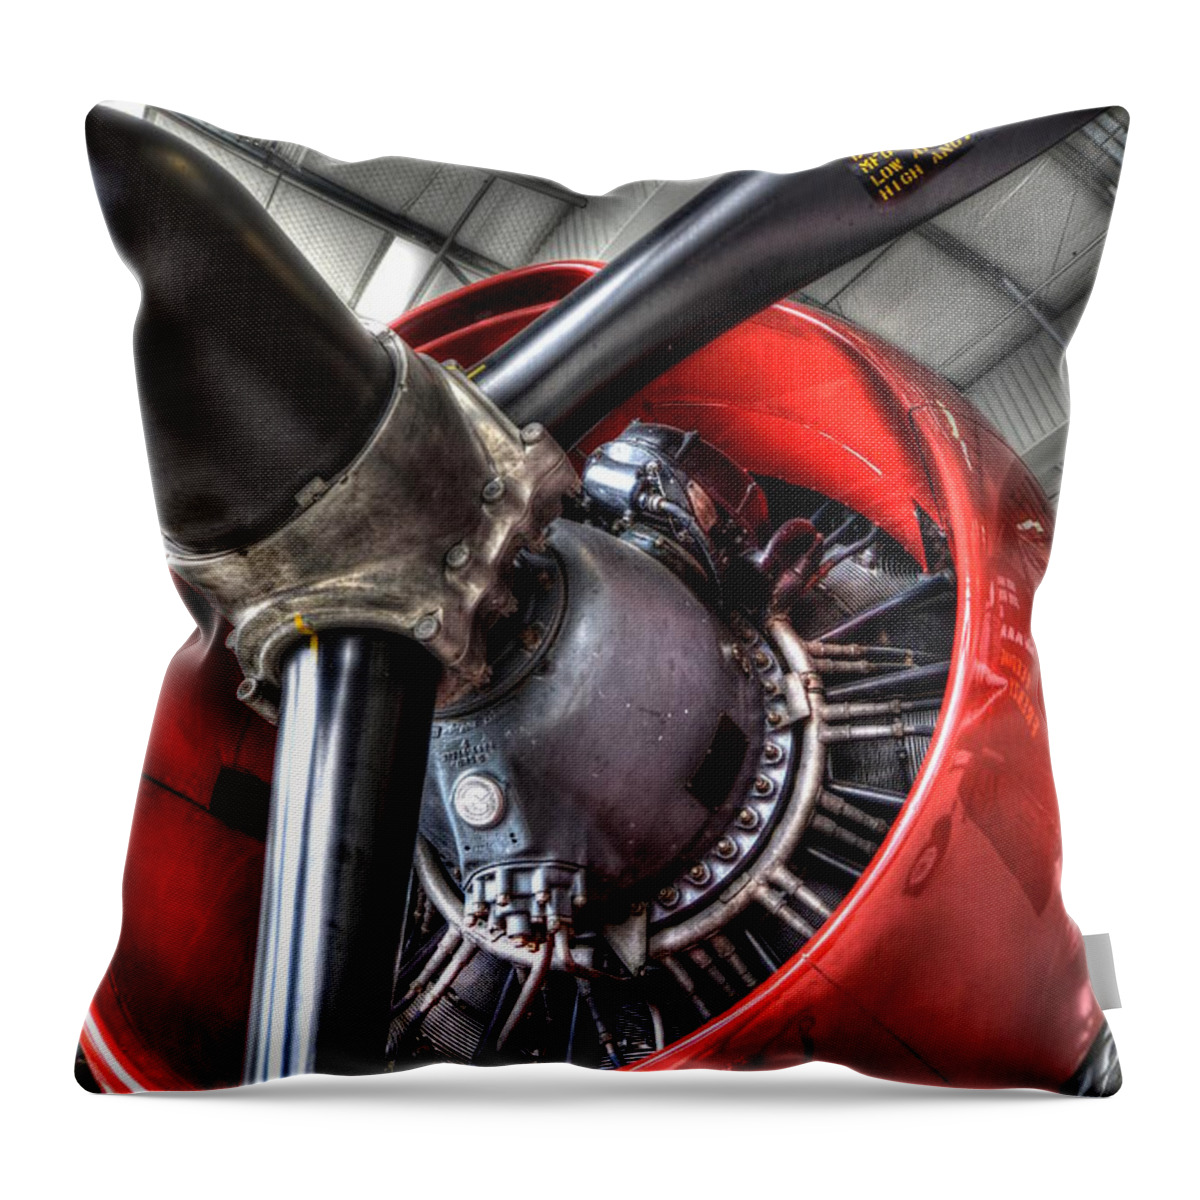 Plane Throw Pillow featuring the photograph Big Power by Craig Incardone